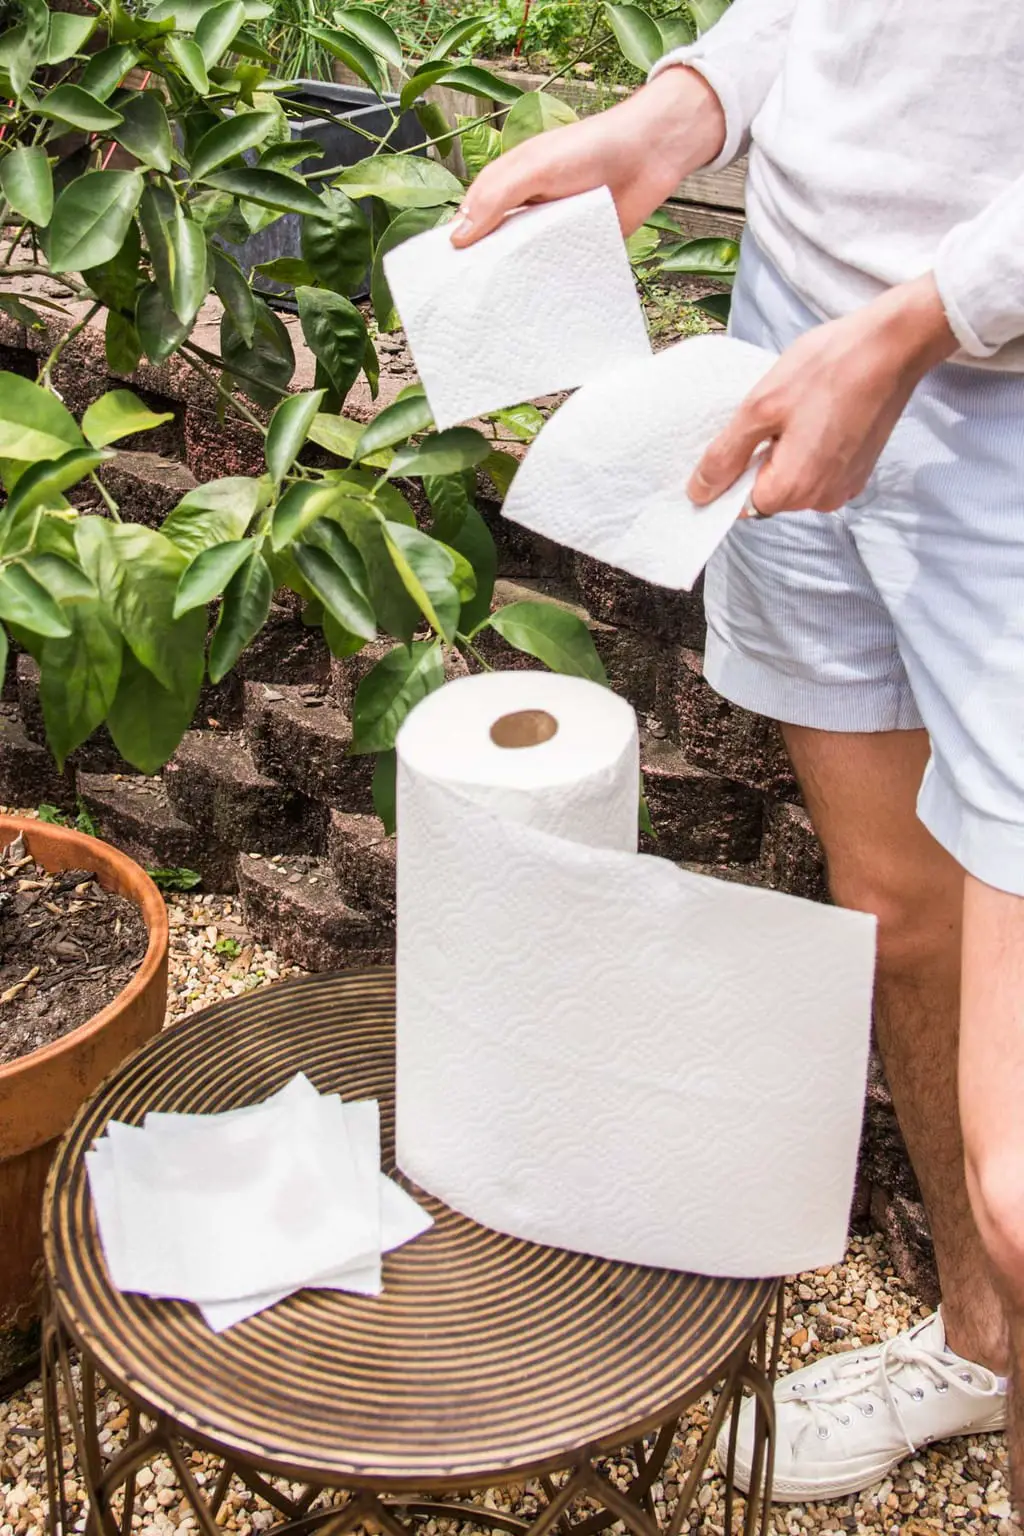 An outdoor movie night on the patio with Brawny Tear-A-Square paper towels on Thou Swell @thouswellblog